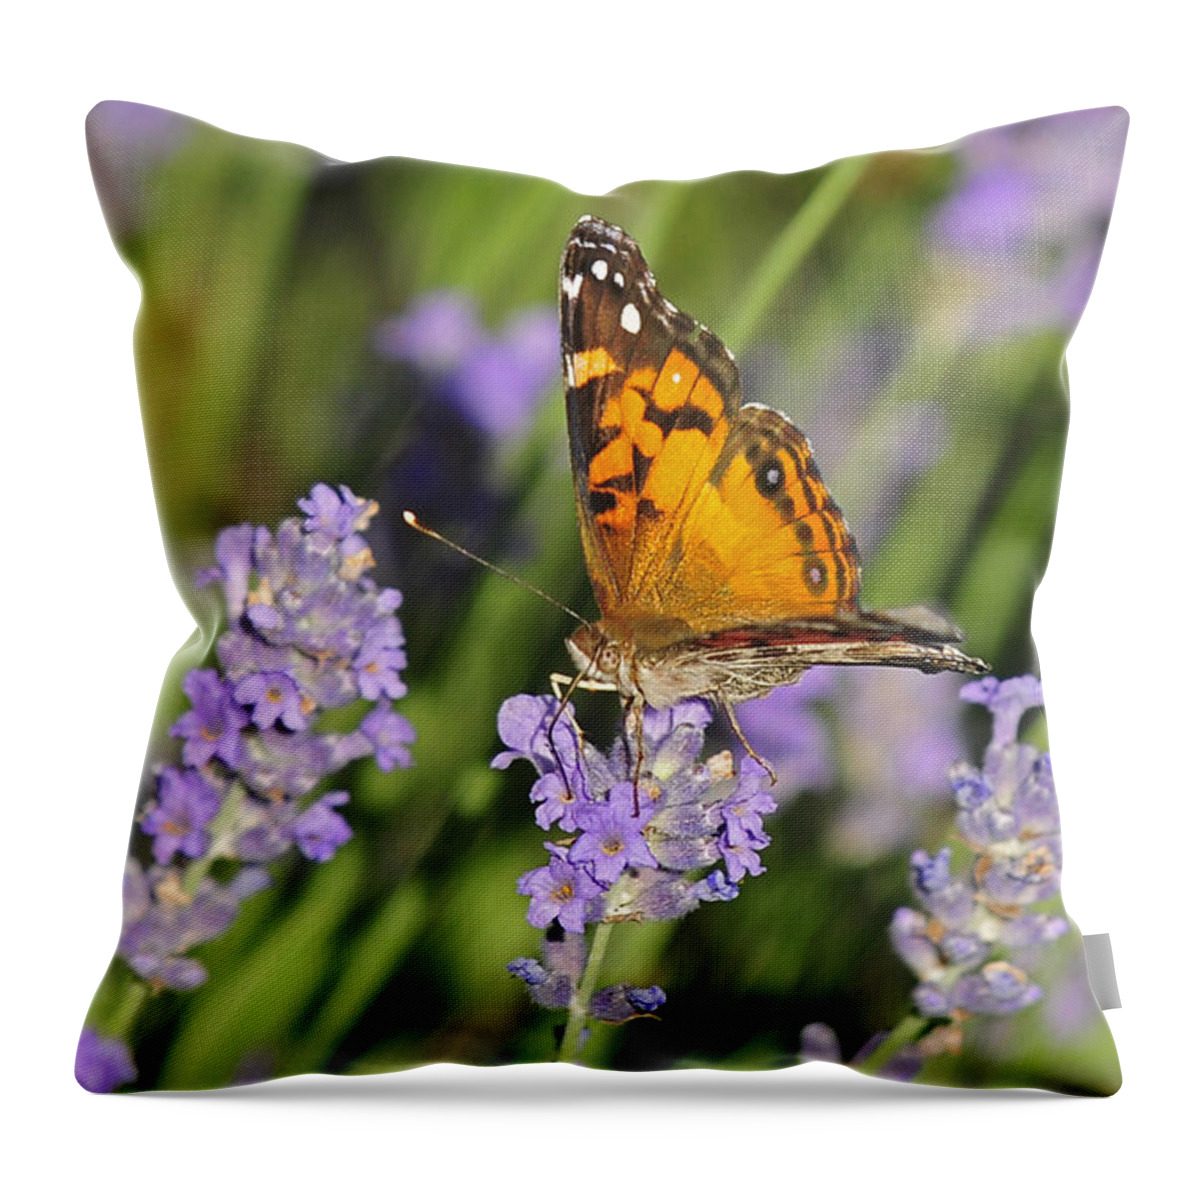 Lavender Throw Pillow featuring the photograph American Lady Butterfly On Lavender by Lara Ellis